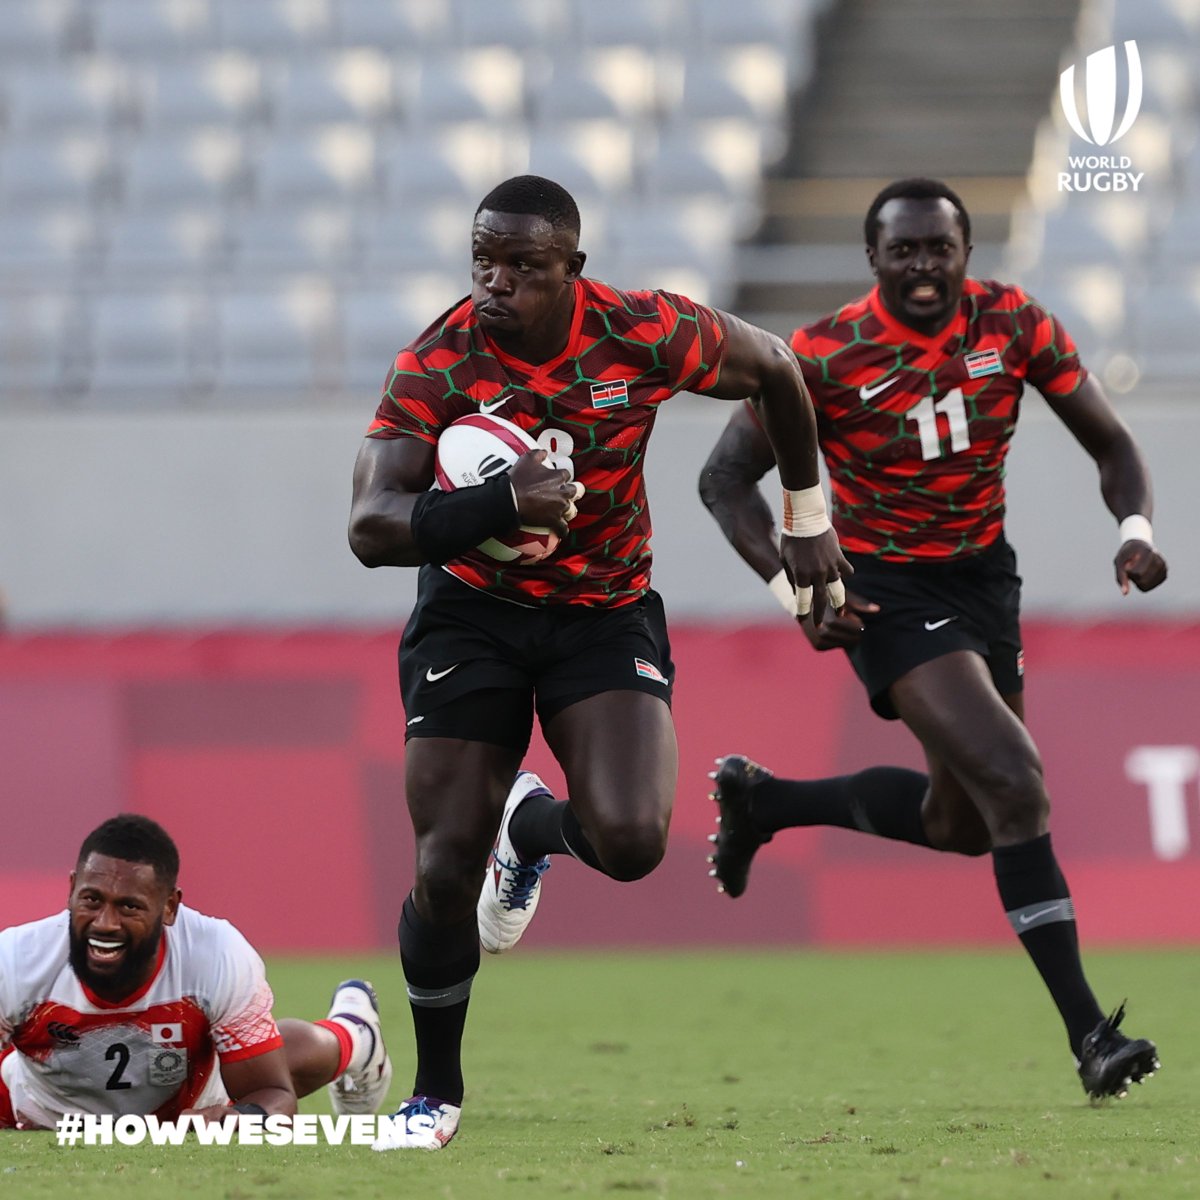 🇰🇪 @andrewopede bows out with a win

A tremendous servant to @KenyaSevens and #Rugby sevens 💪 👏

#HowWeSevens | #Tokyo2020